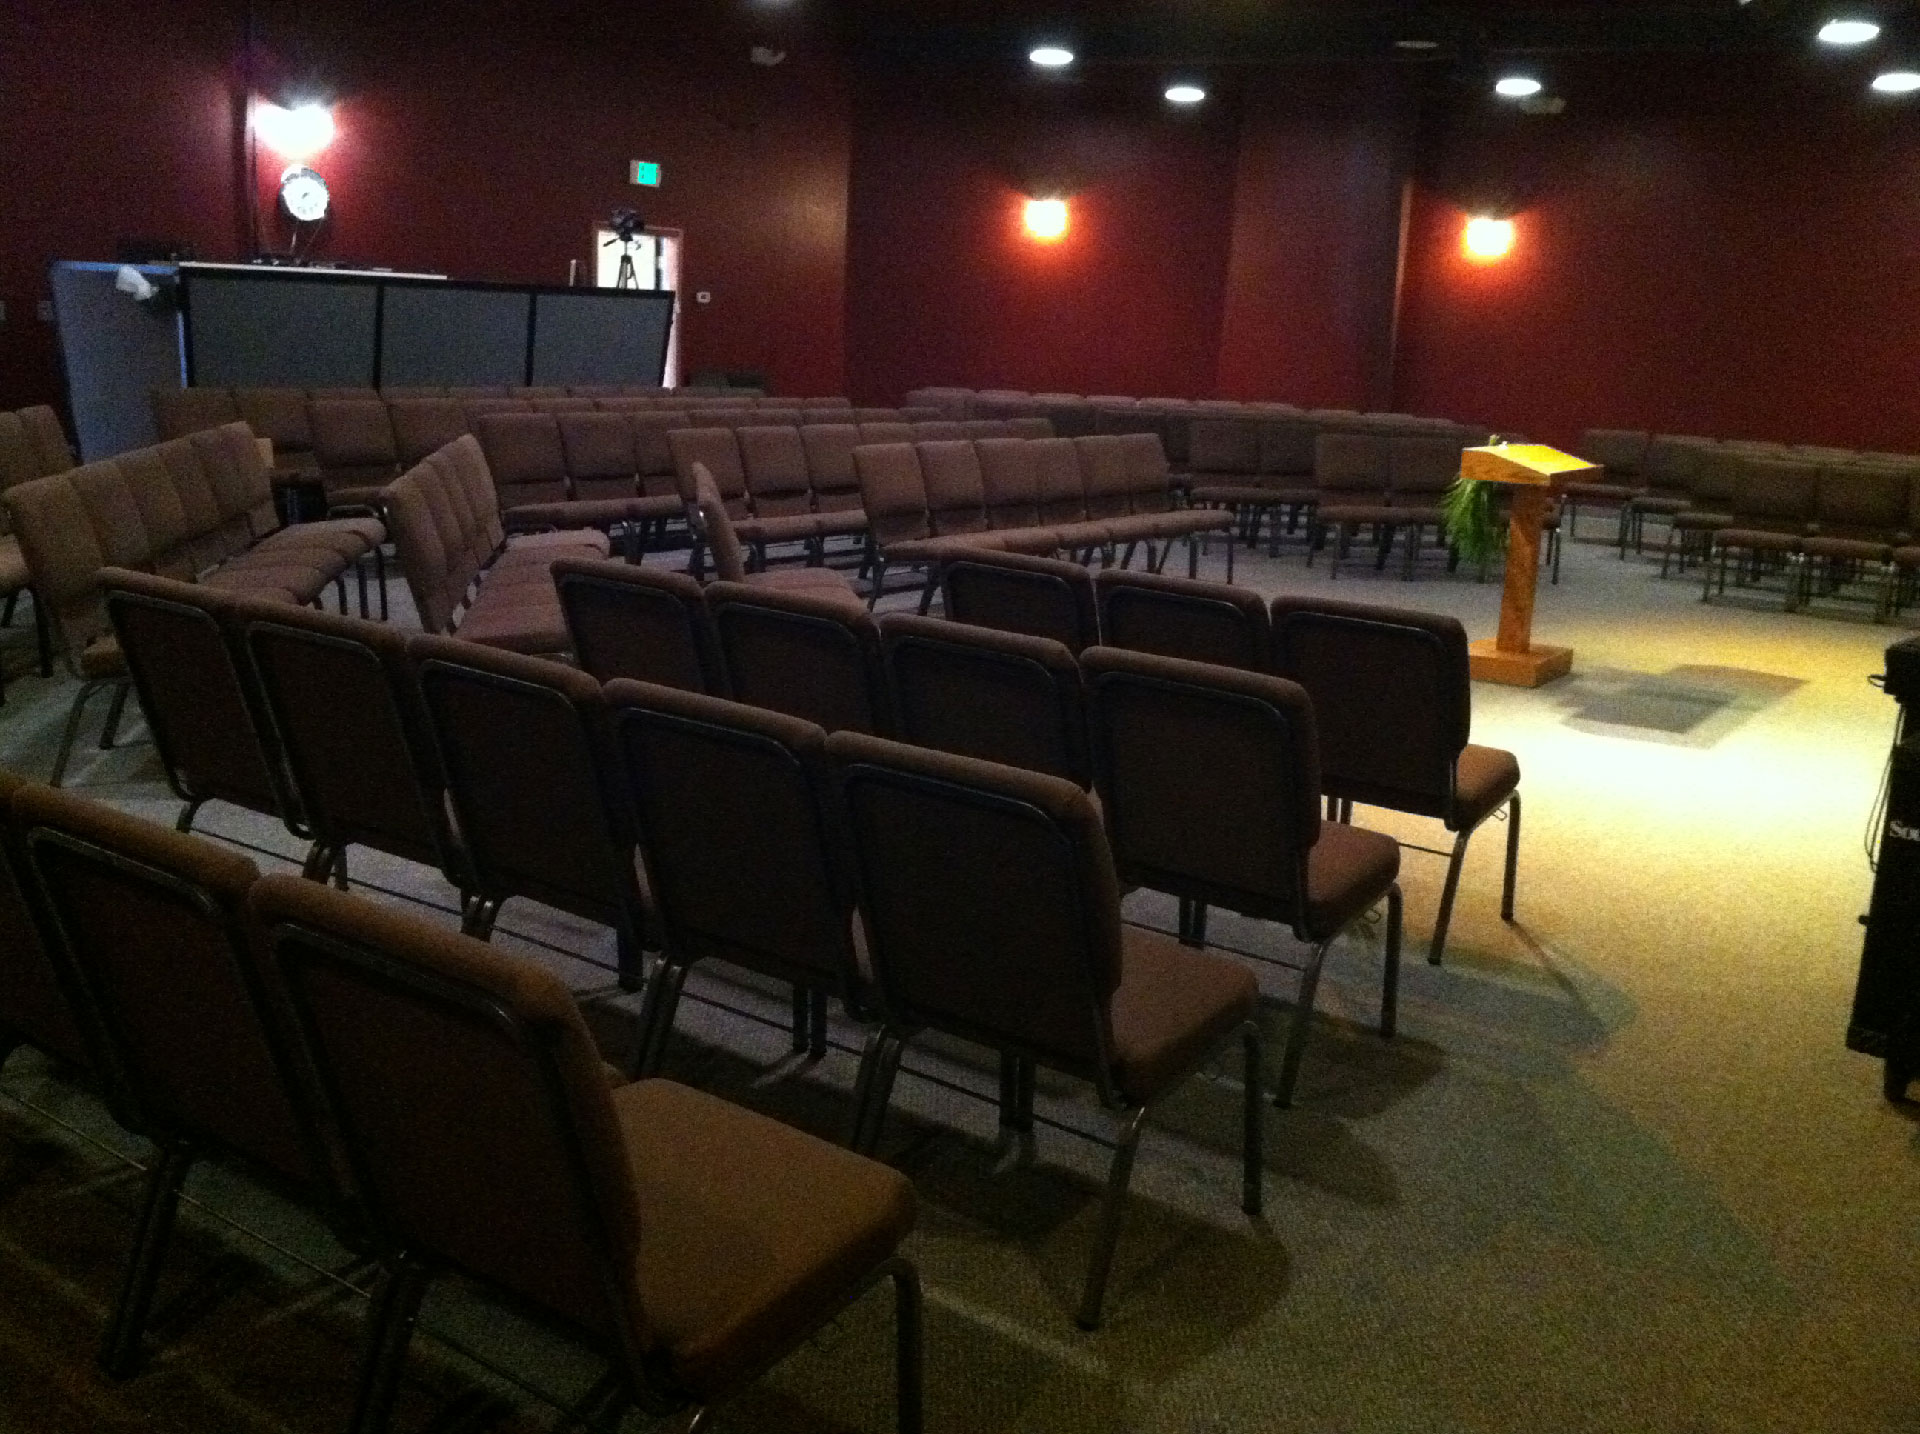 Great Picture of Church Chairs at Calvary Chapel, Perris